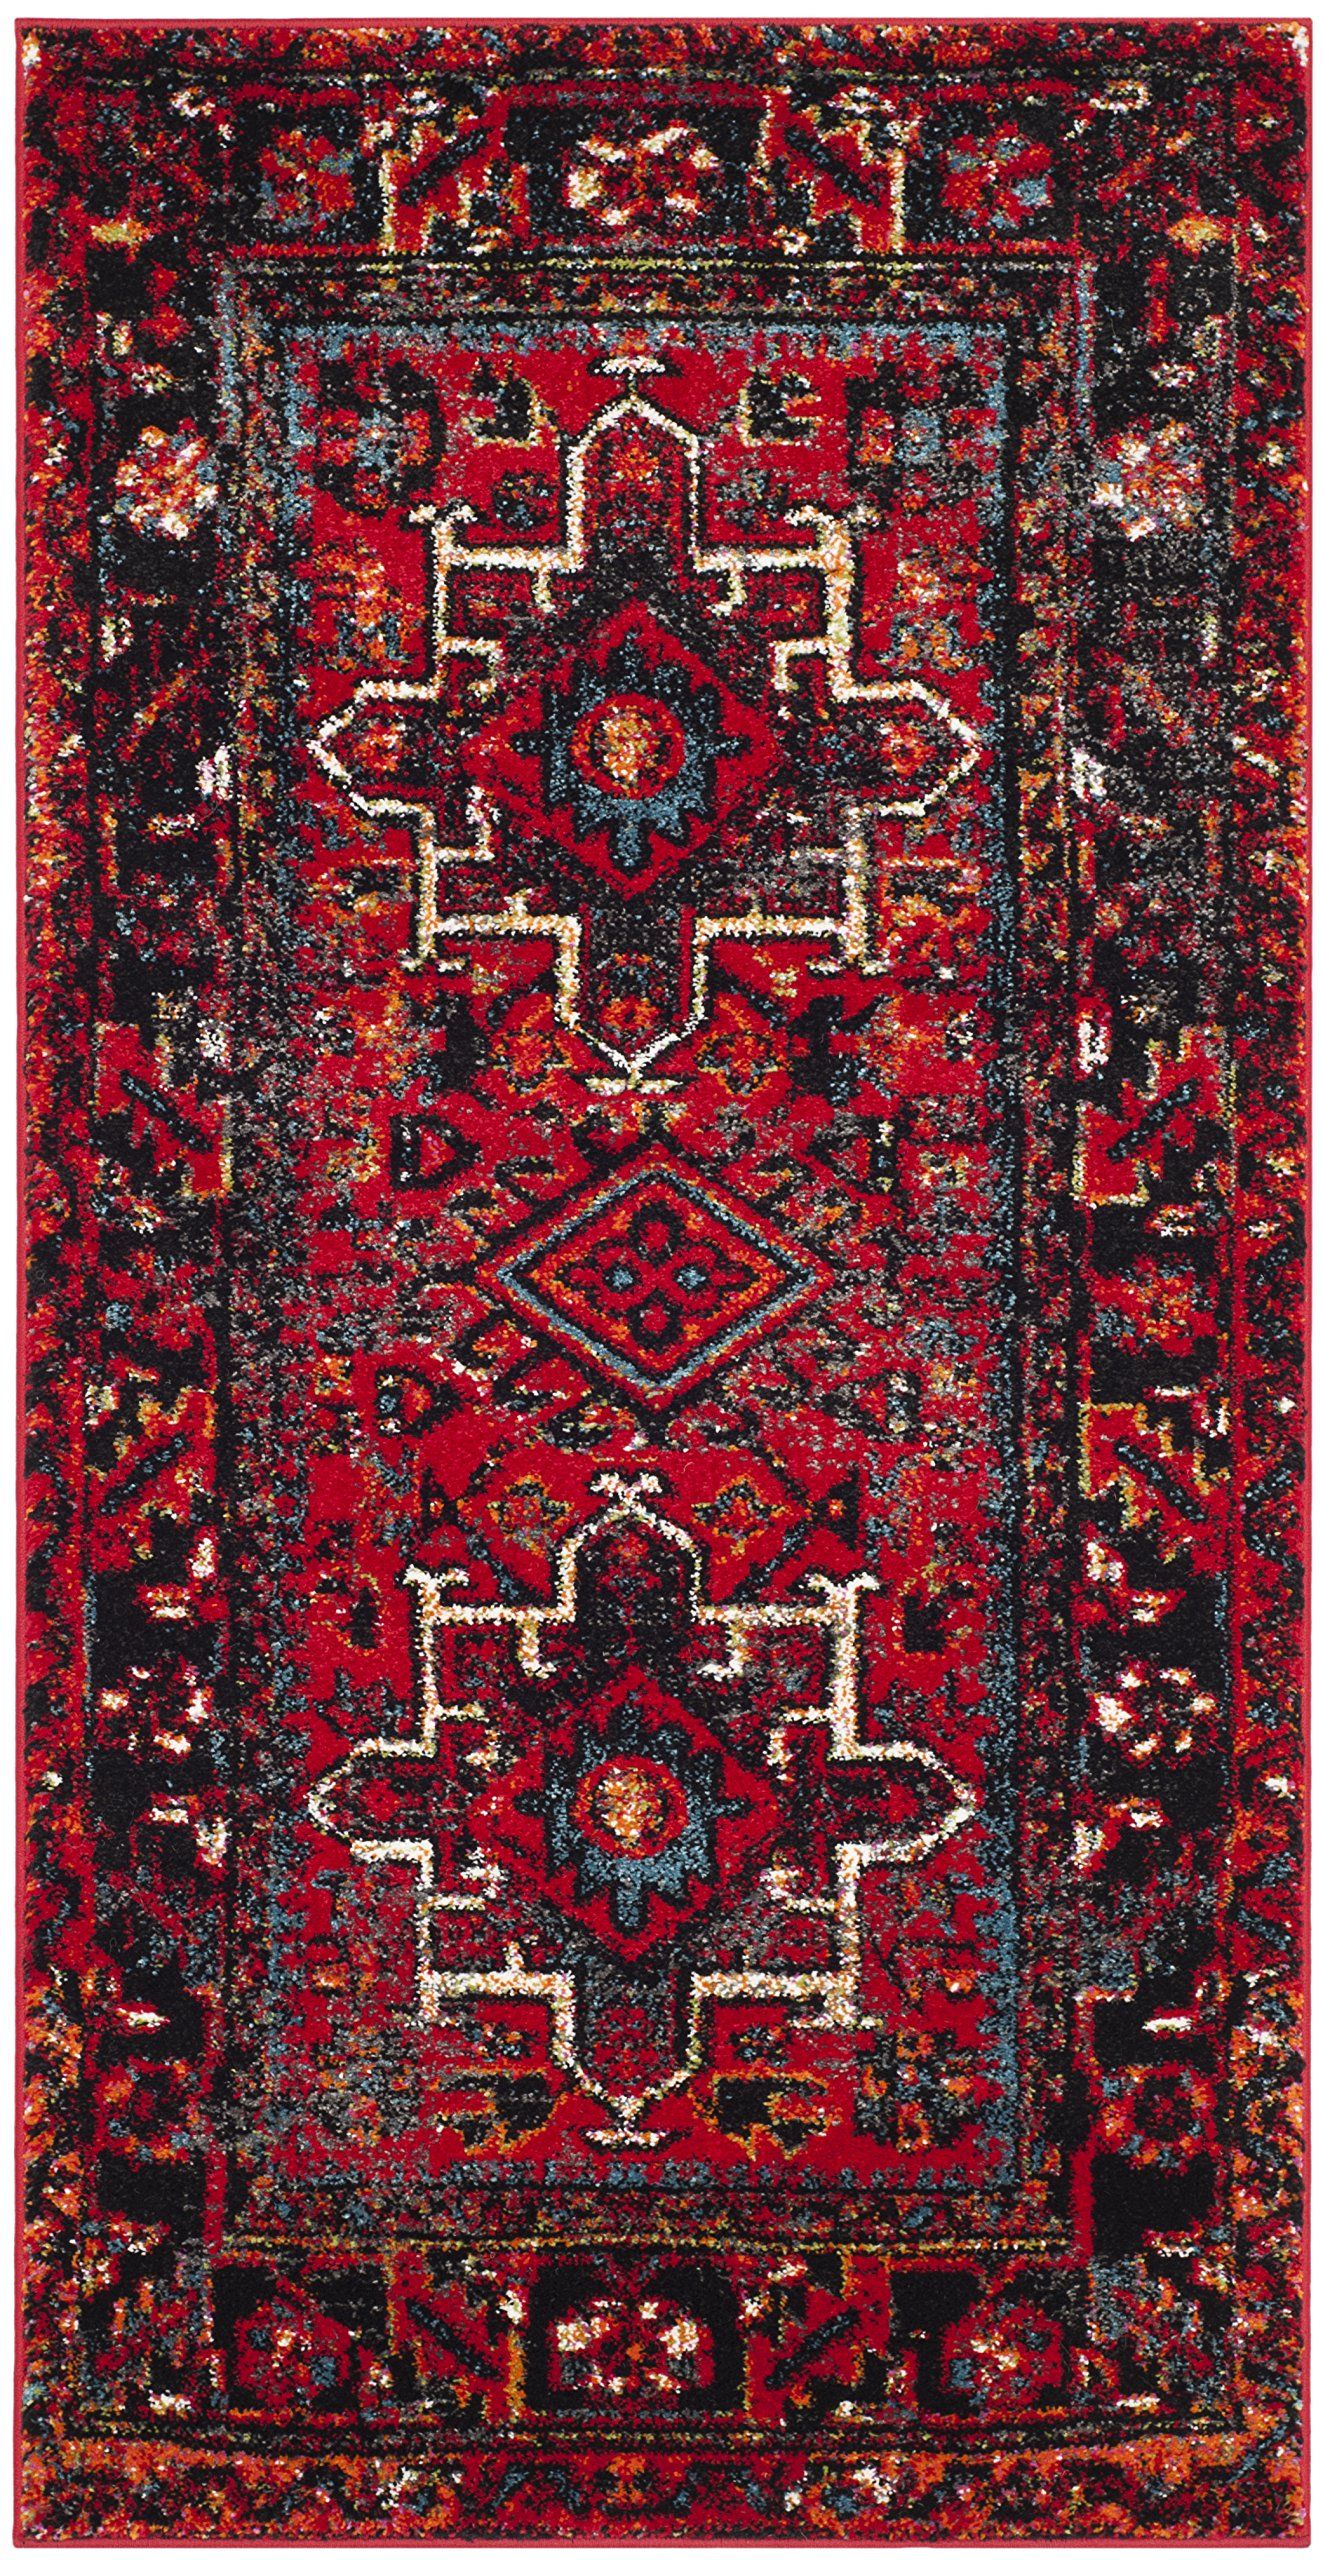 Safavieh Vintage Hamadan Collection VTH211A Antiqued Oriental Red and Multi Area Rug (2'7" x 5') | Amazon (US)